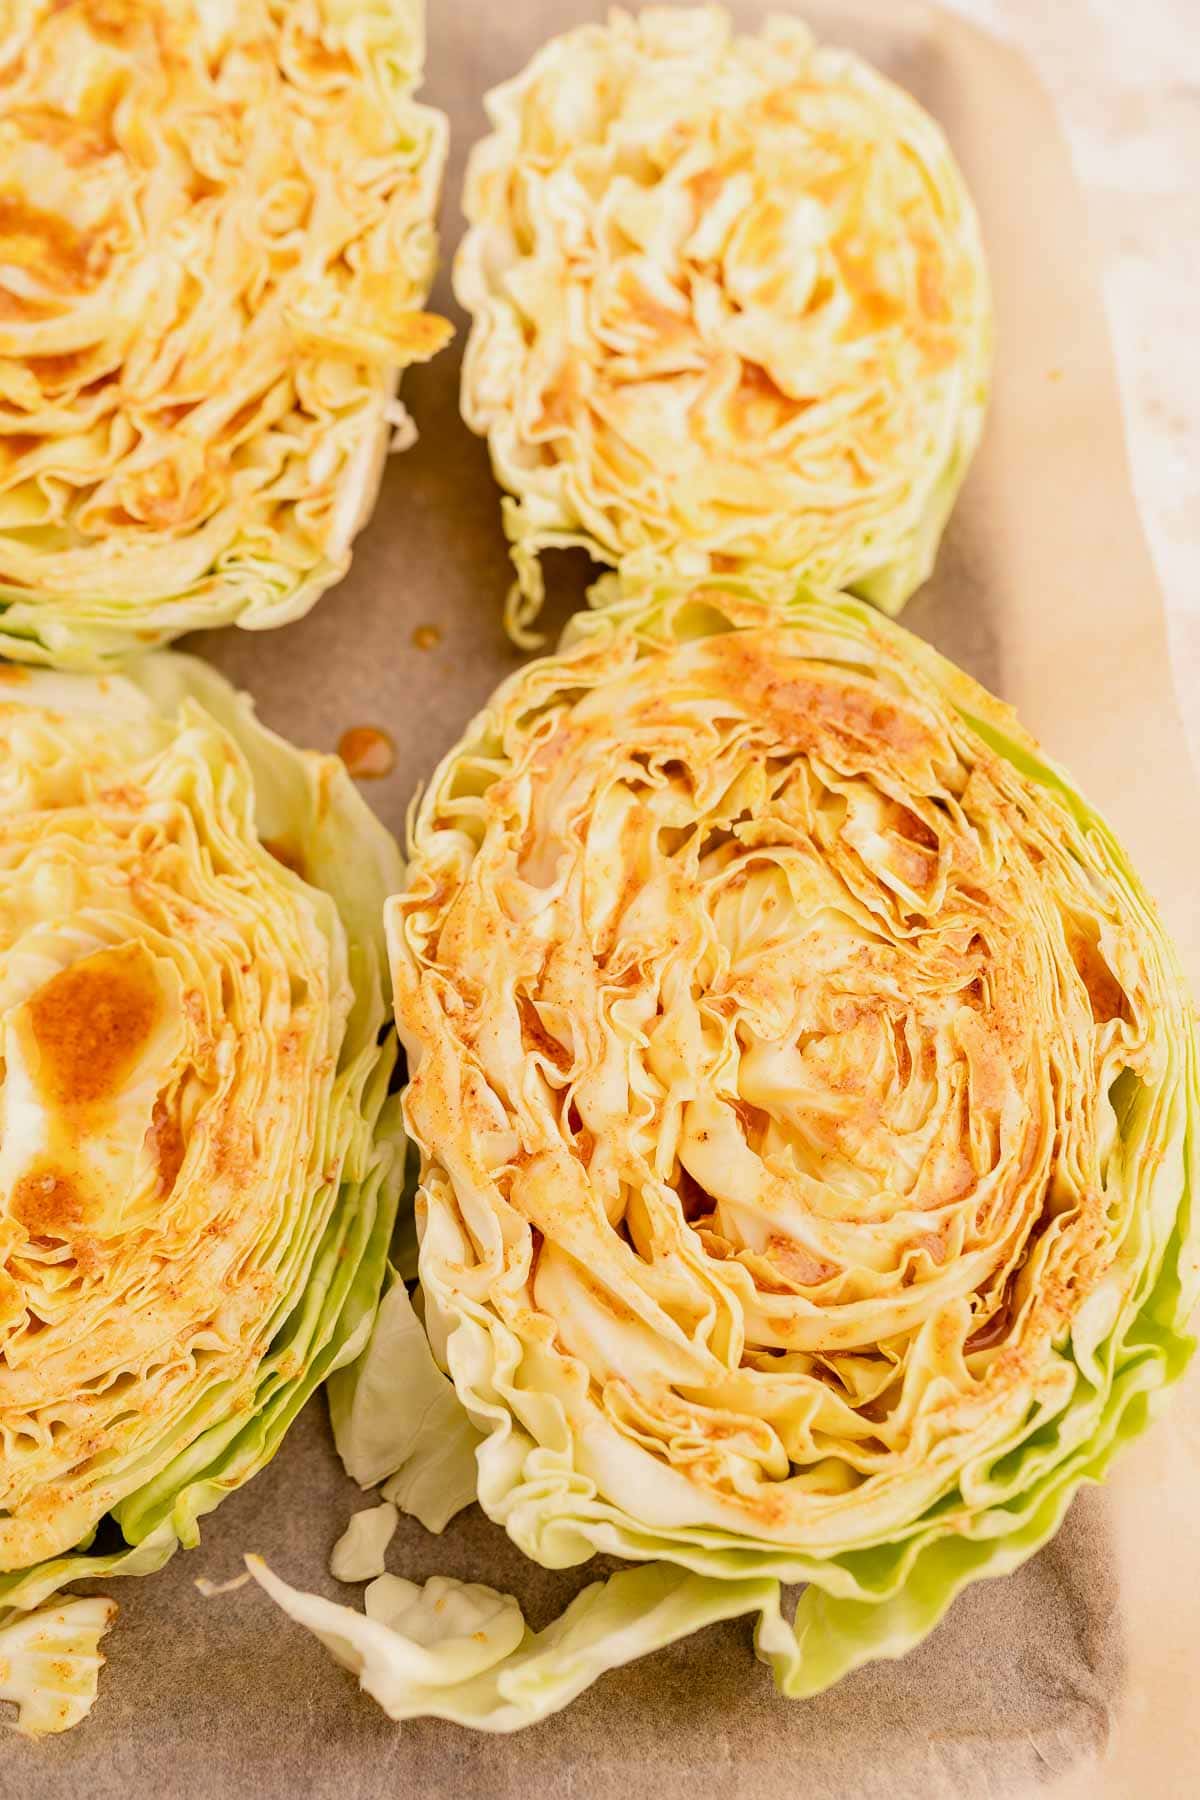 Cabbage steaks on a tray, displaying layers and textures, with some outer leaves detached.